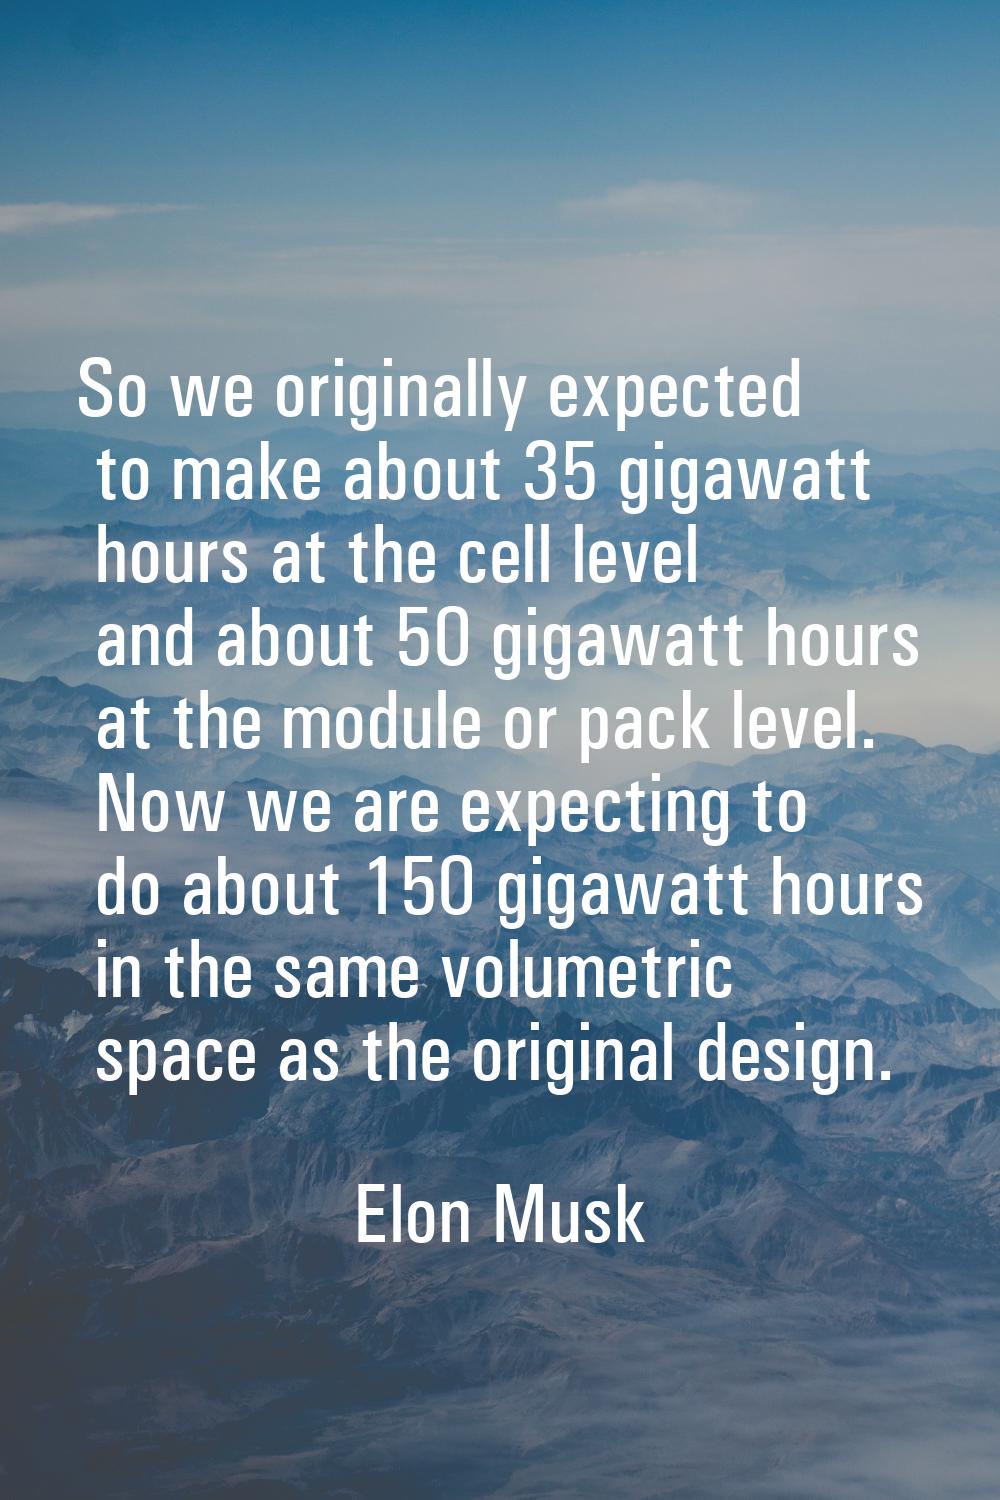 So we originally expected to make about 35 gigawatt hours at the cell level and about 50 gigawatt h